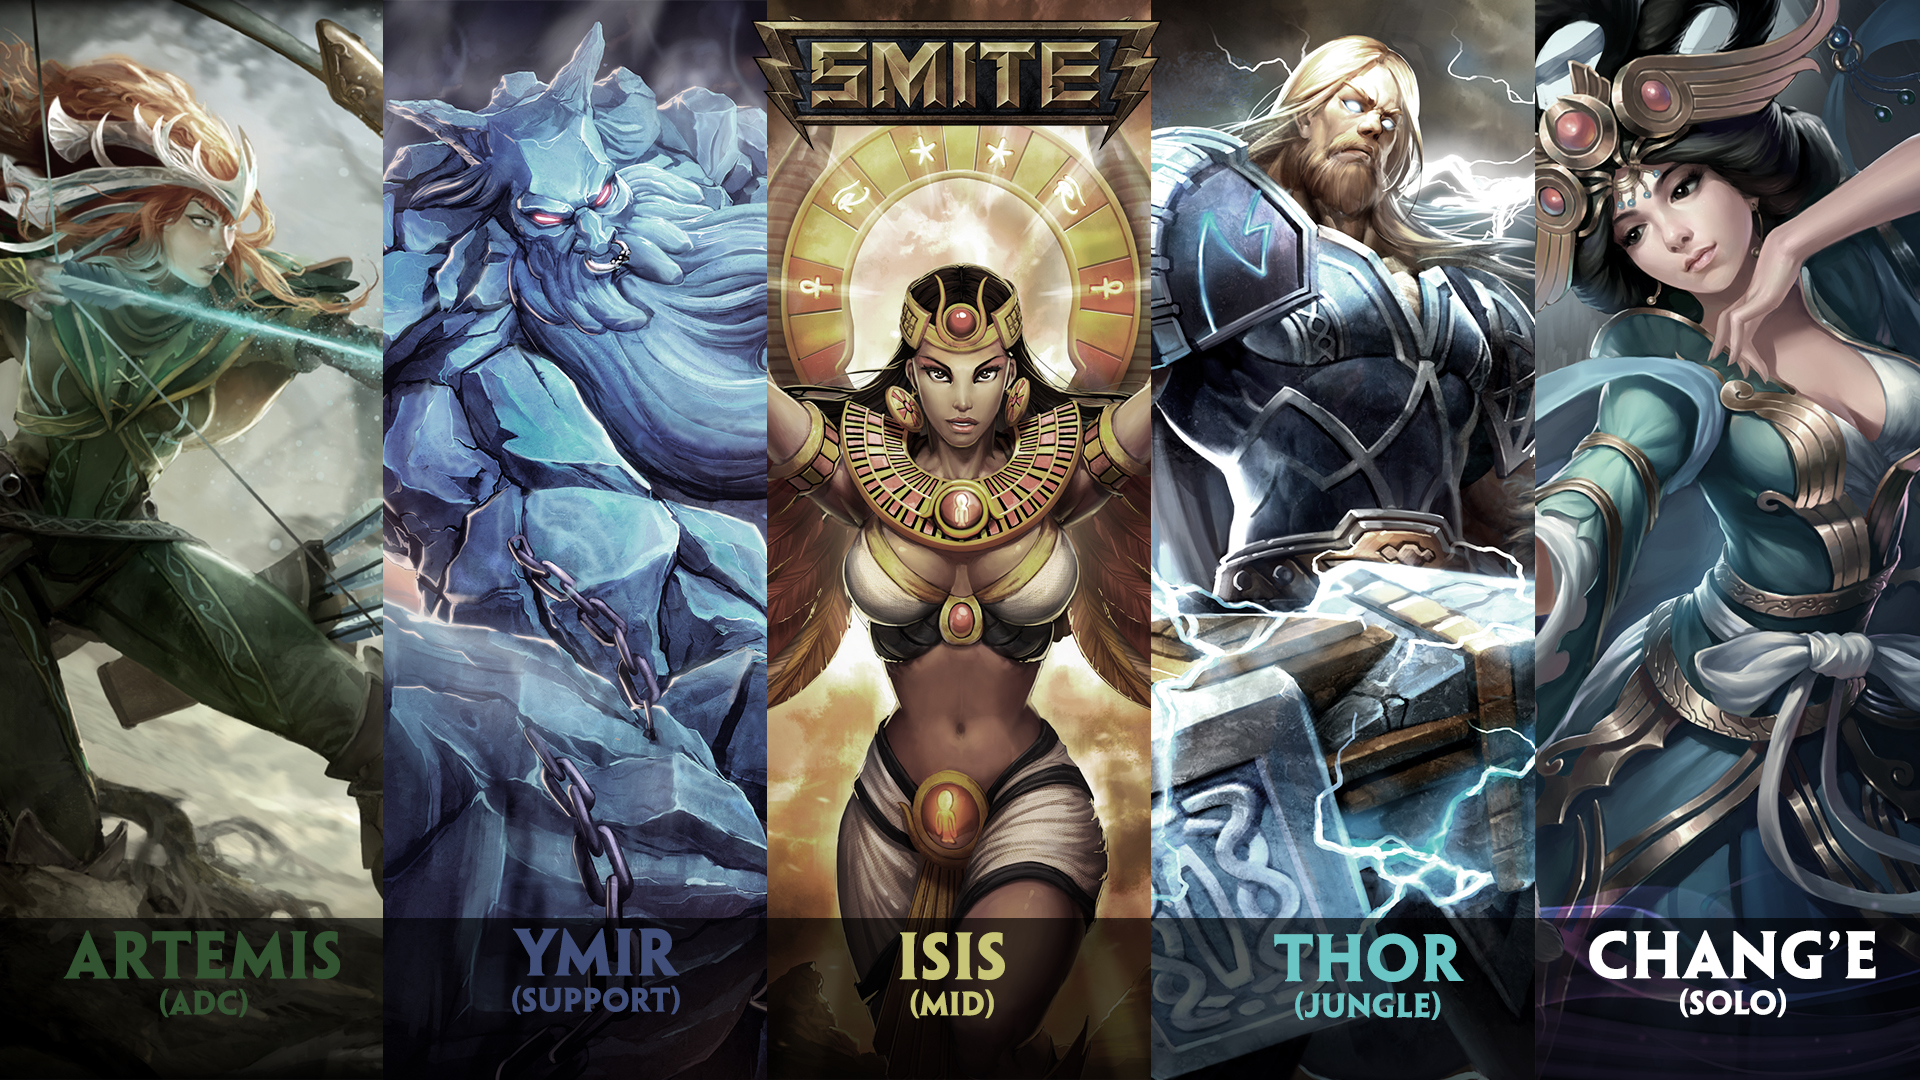 Isis Smite Wallpapers